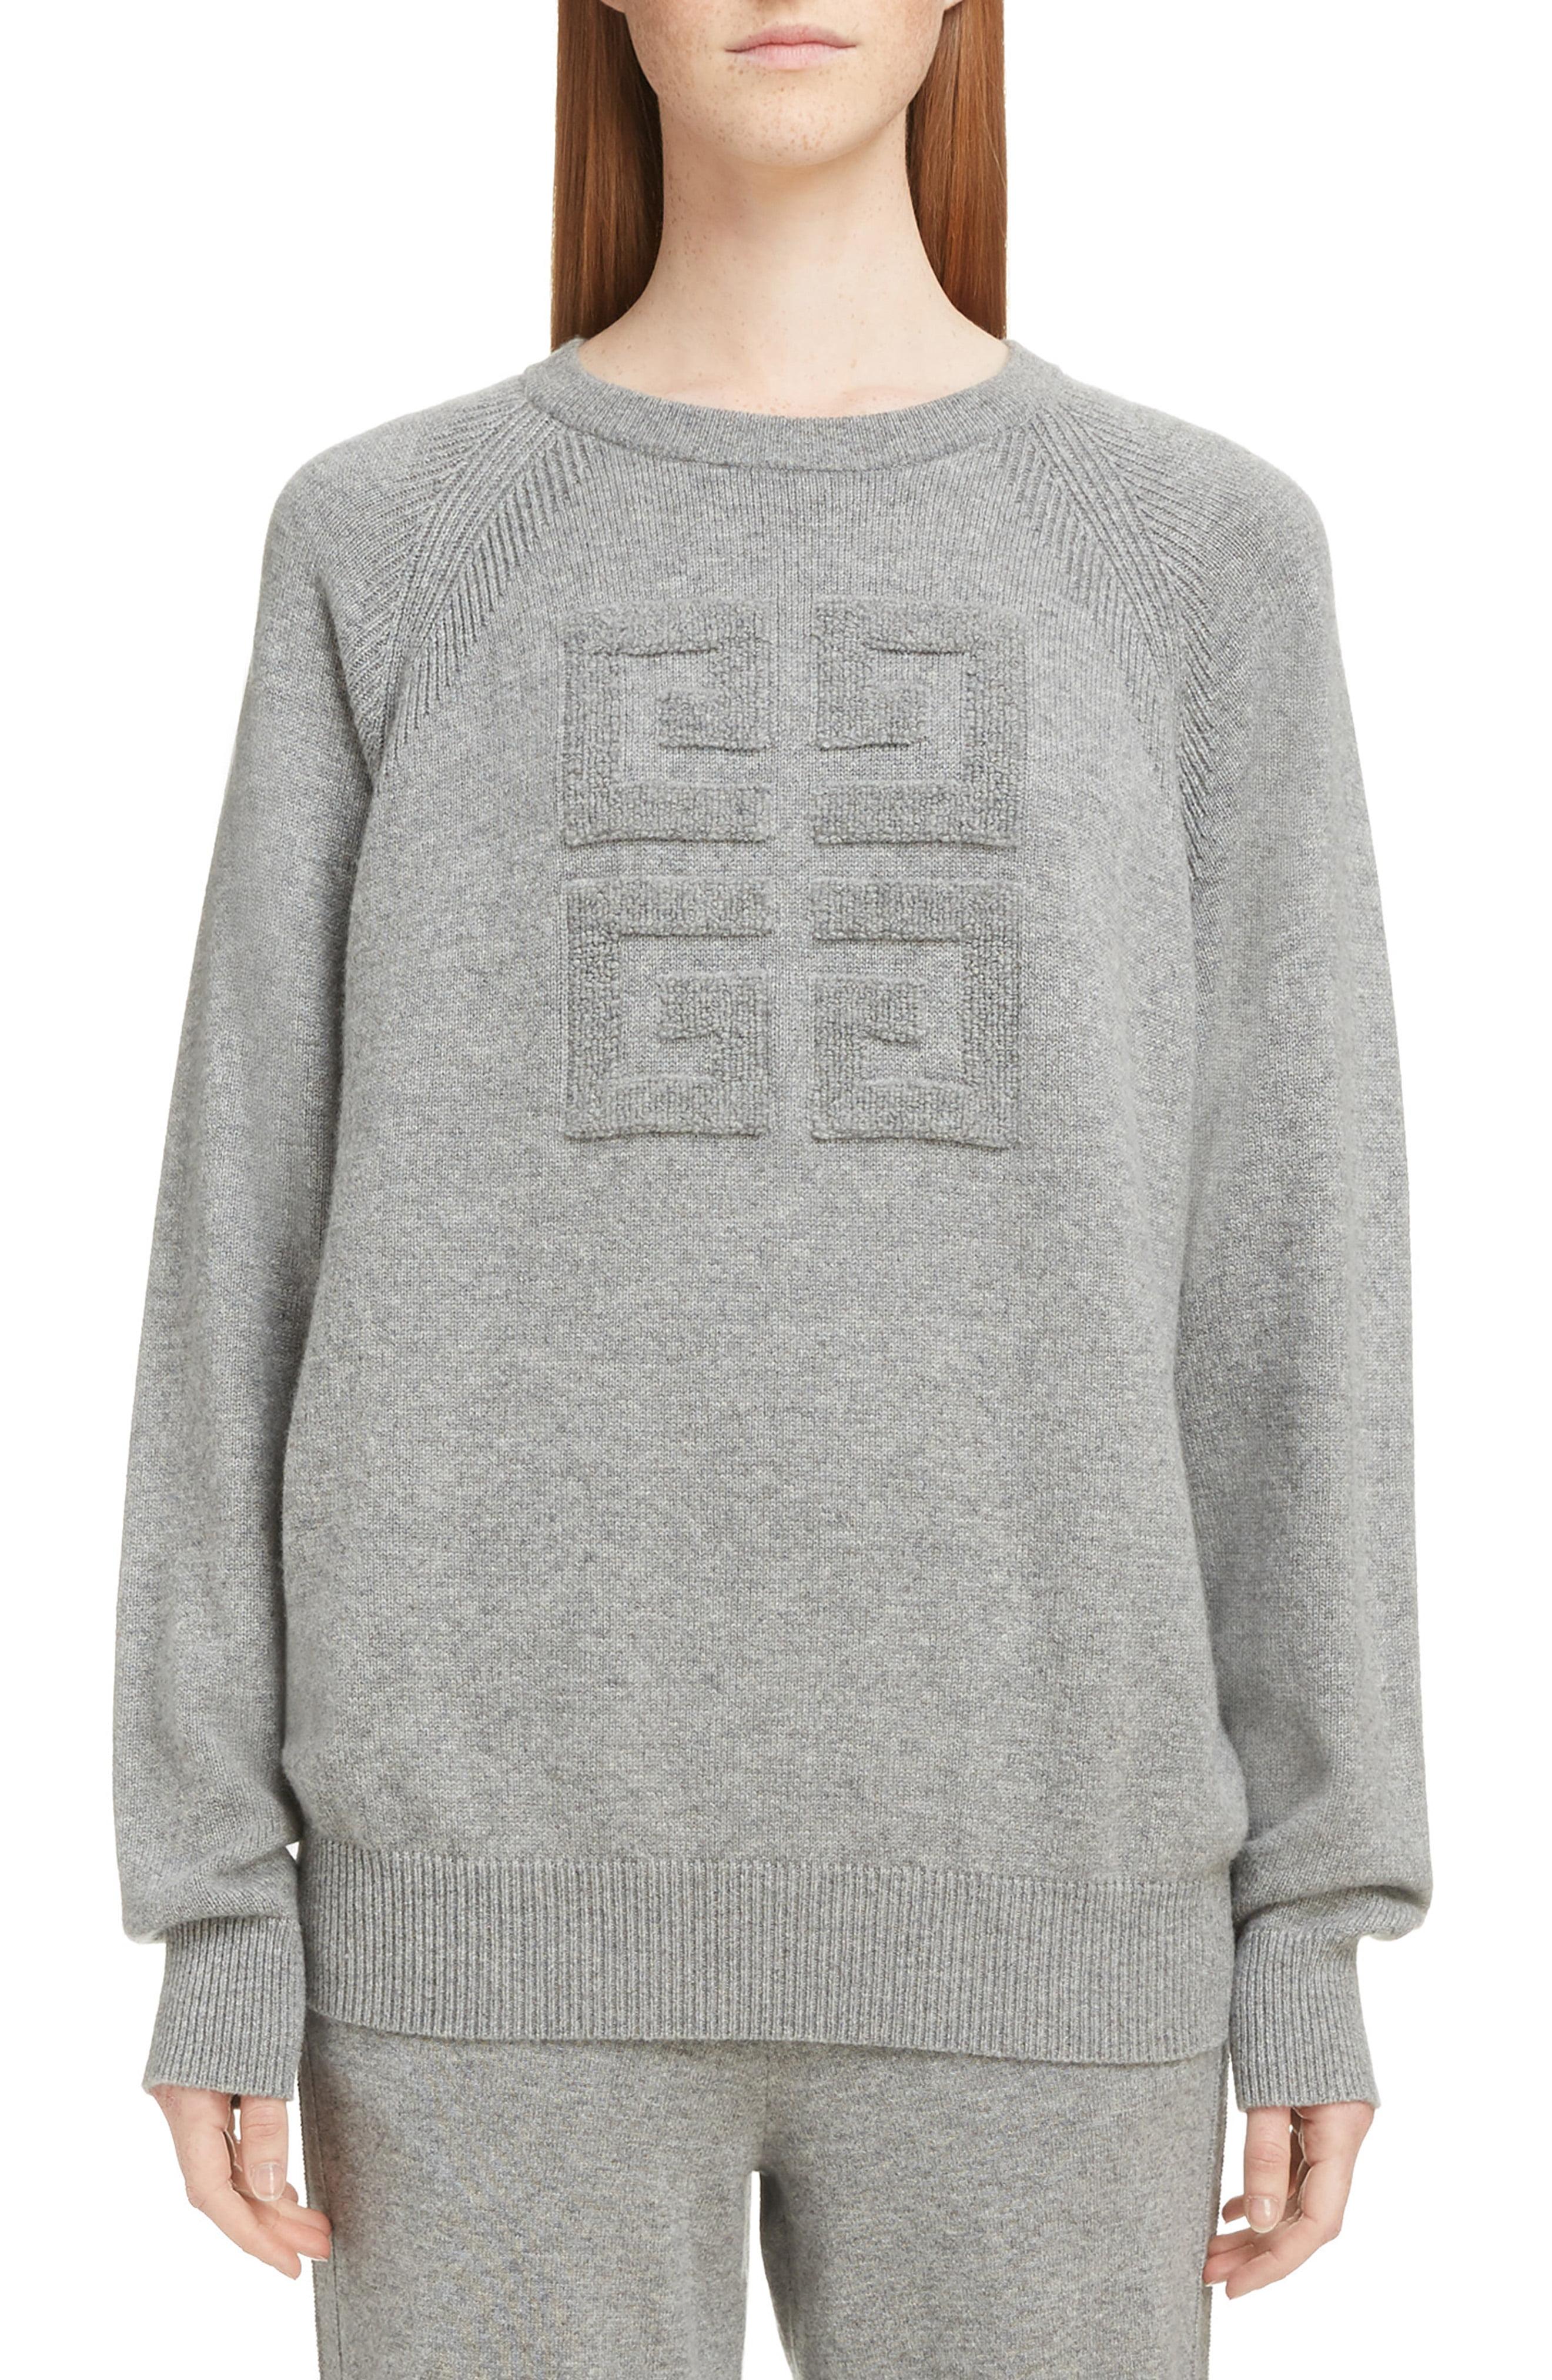 Givenchy Logo Cashmere Sweater in Grey 